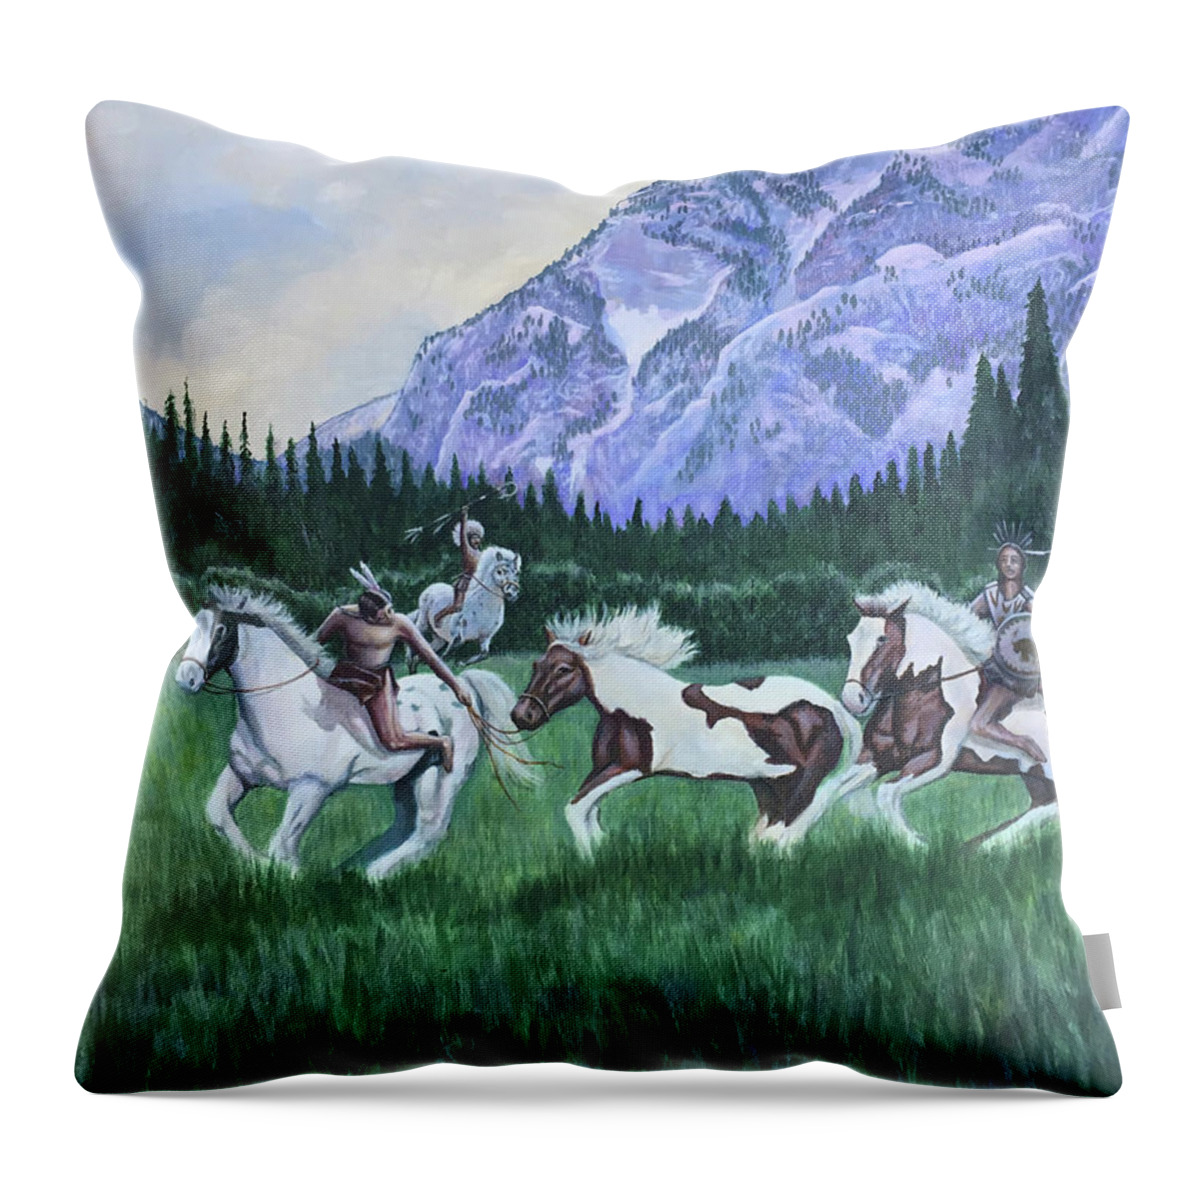 Landscape Throw Pillow featuring the painting Minninnewah Taken by Mr Dill